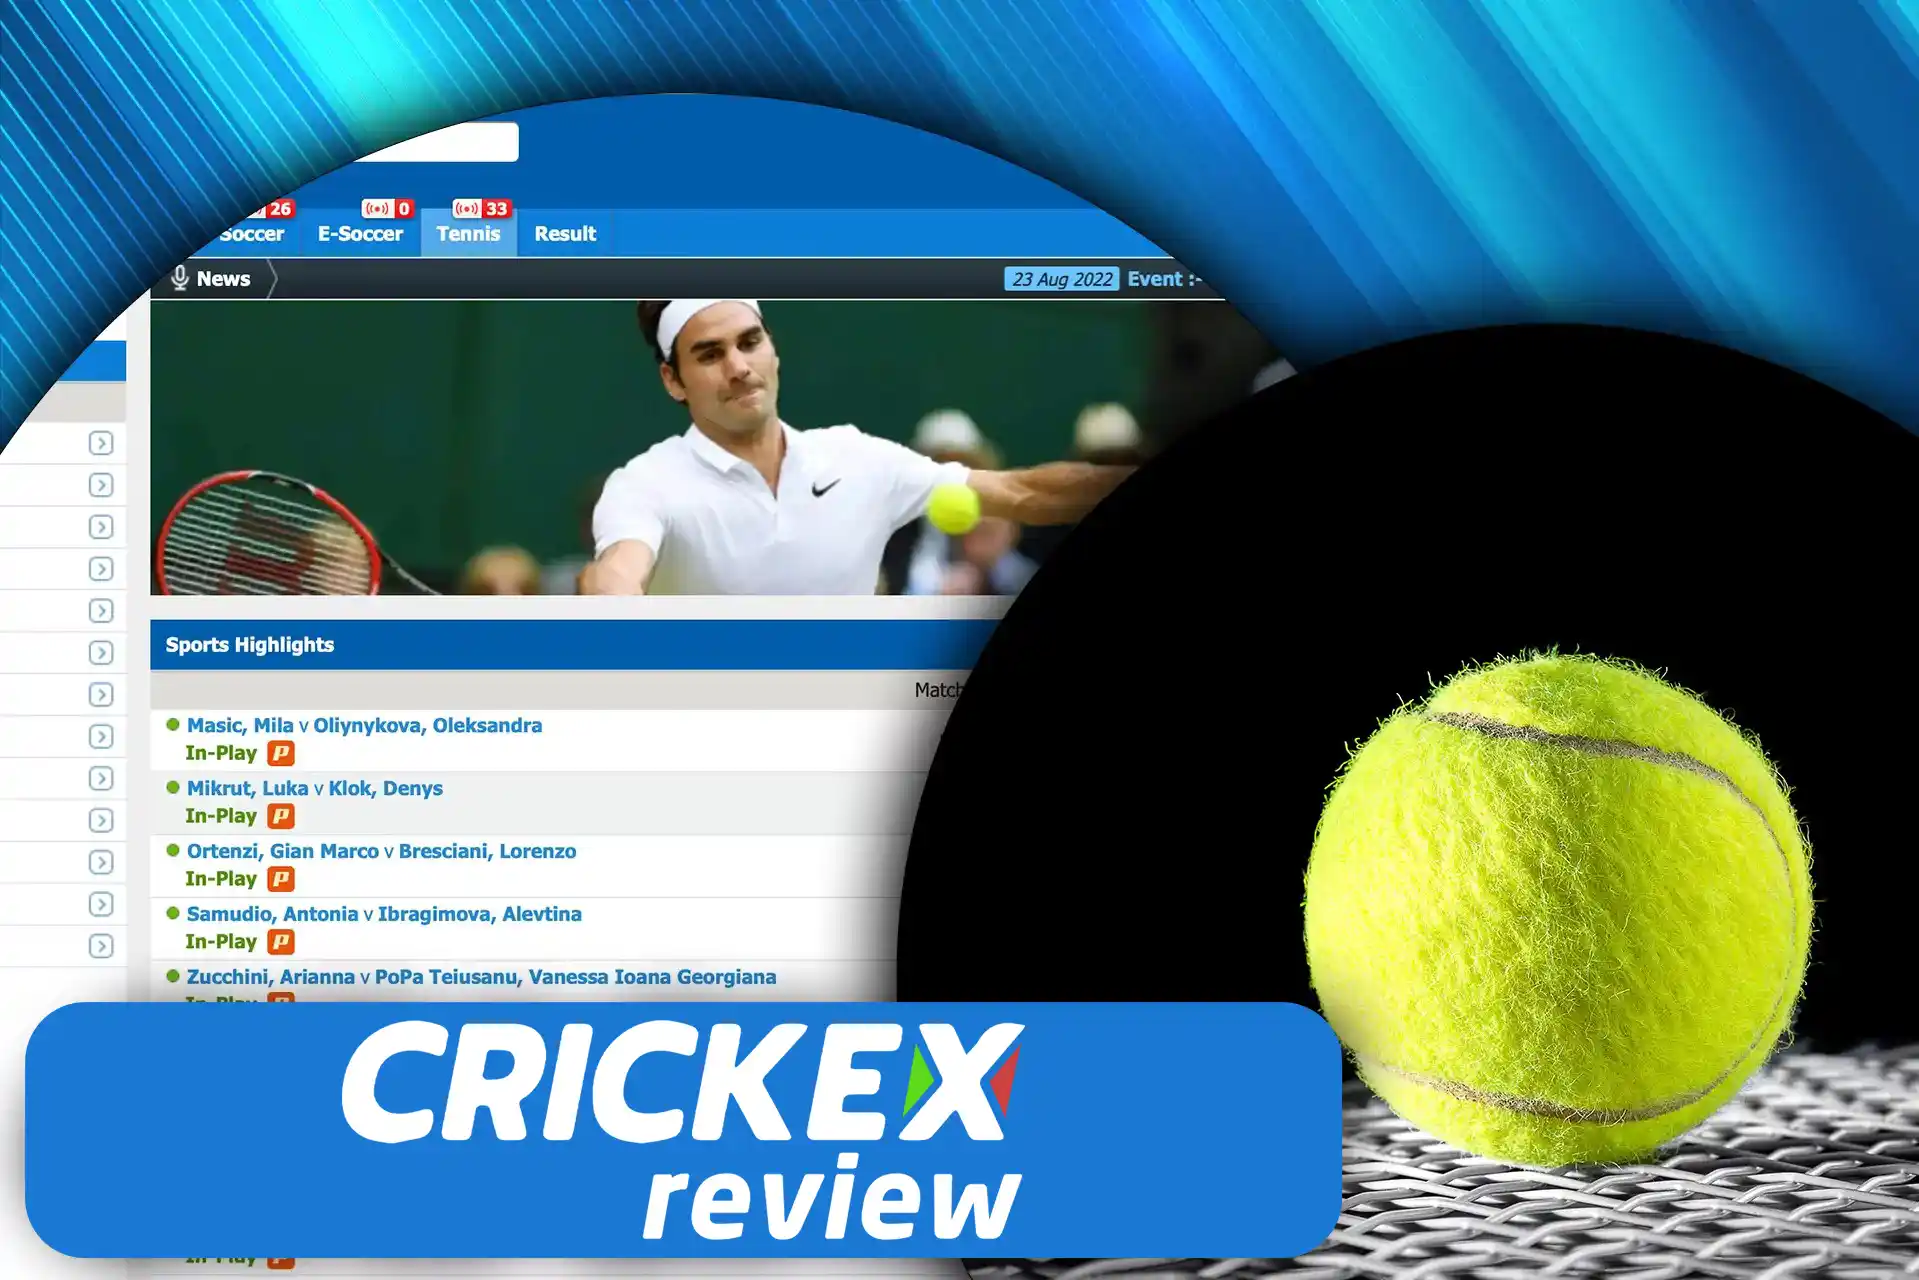 Tennis betting is also available at Crickex.